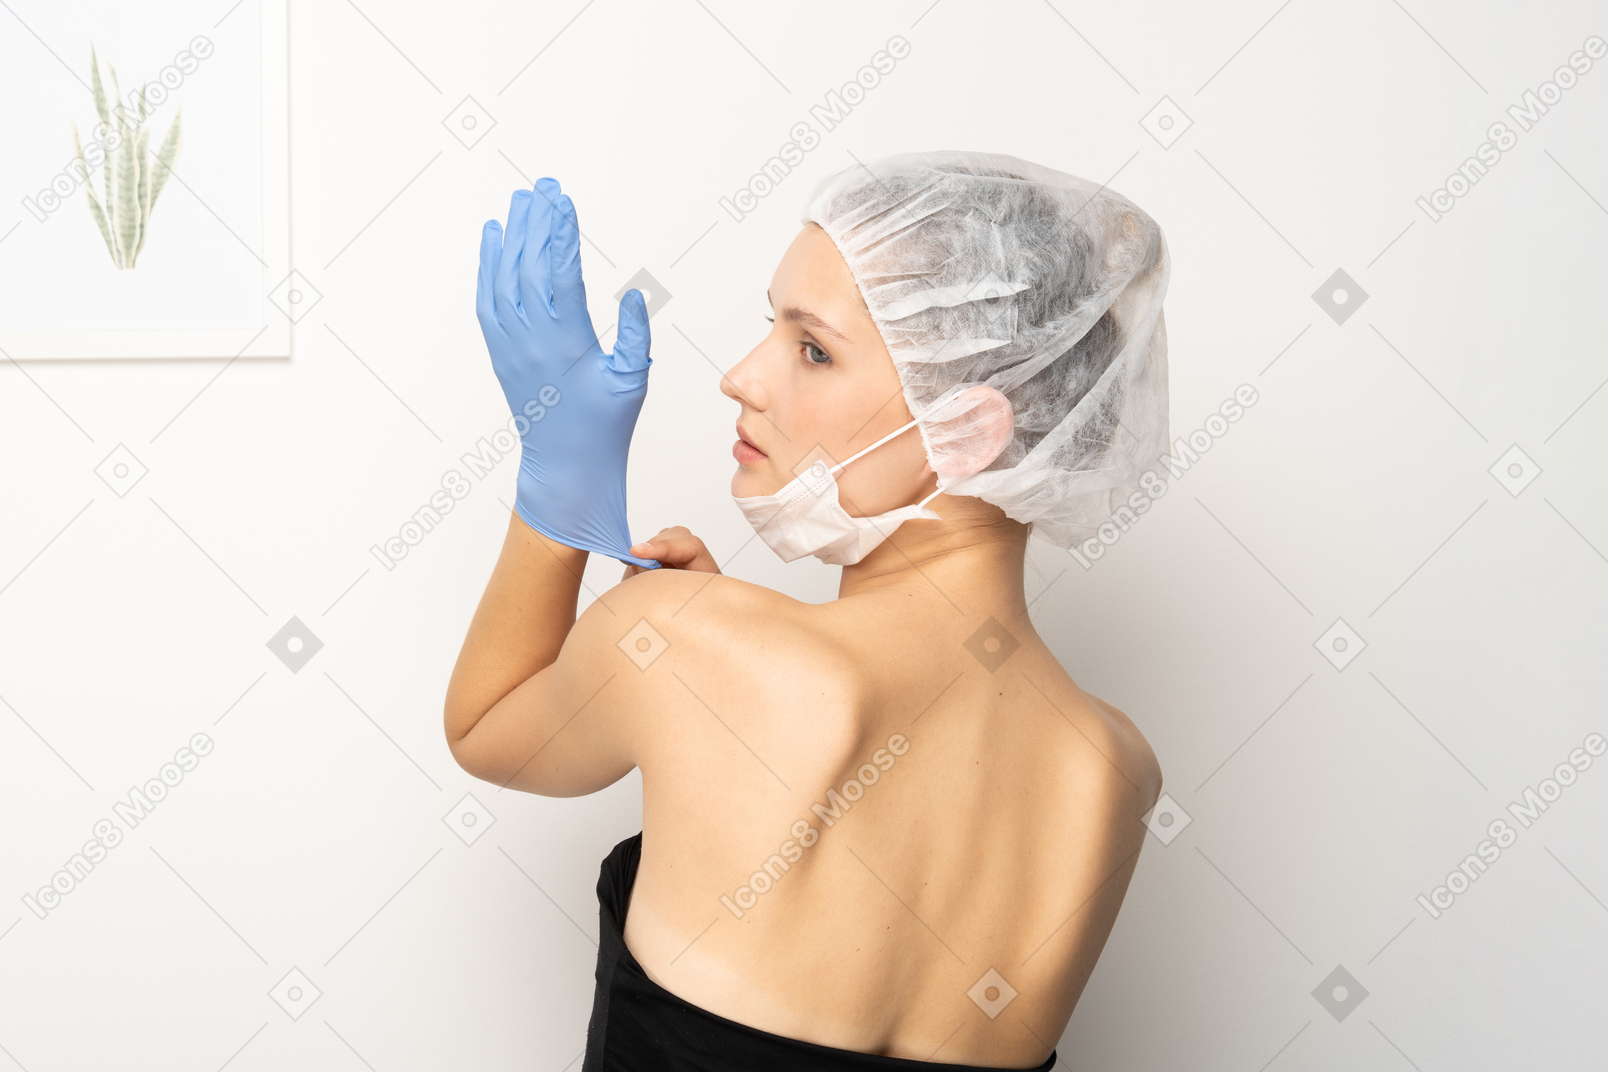 Young woman putting on medical gloves